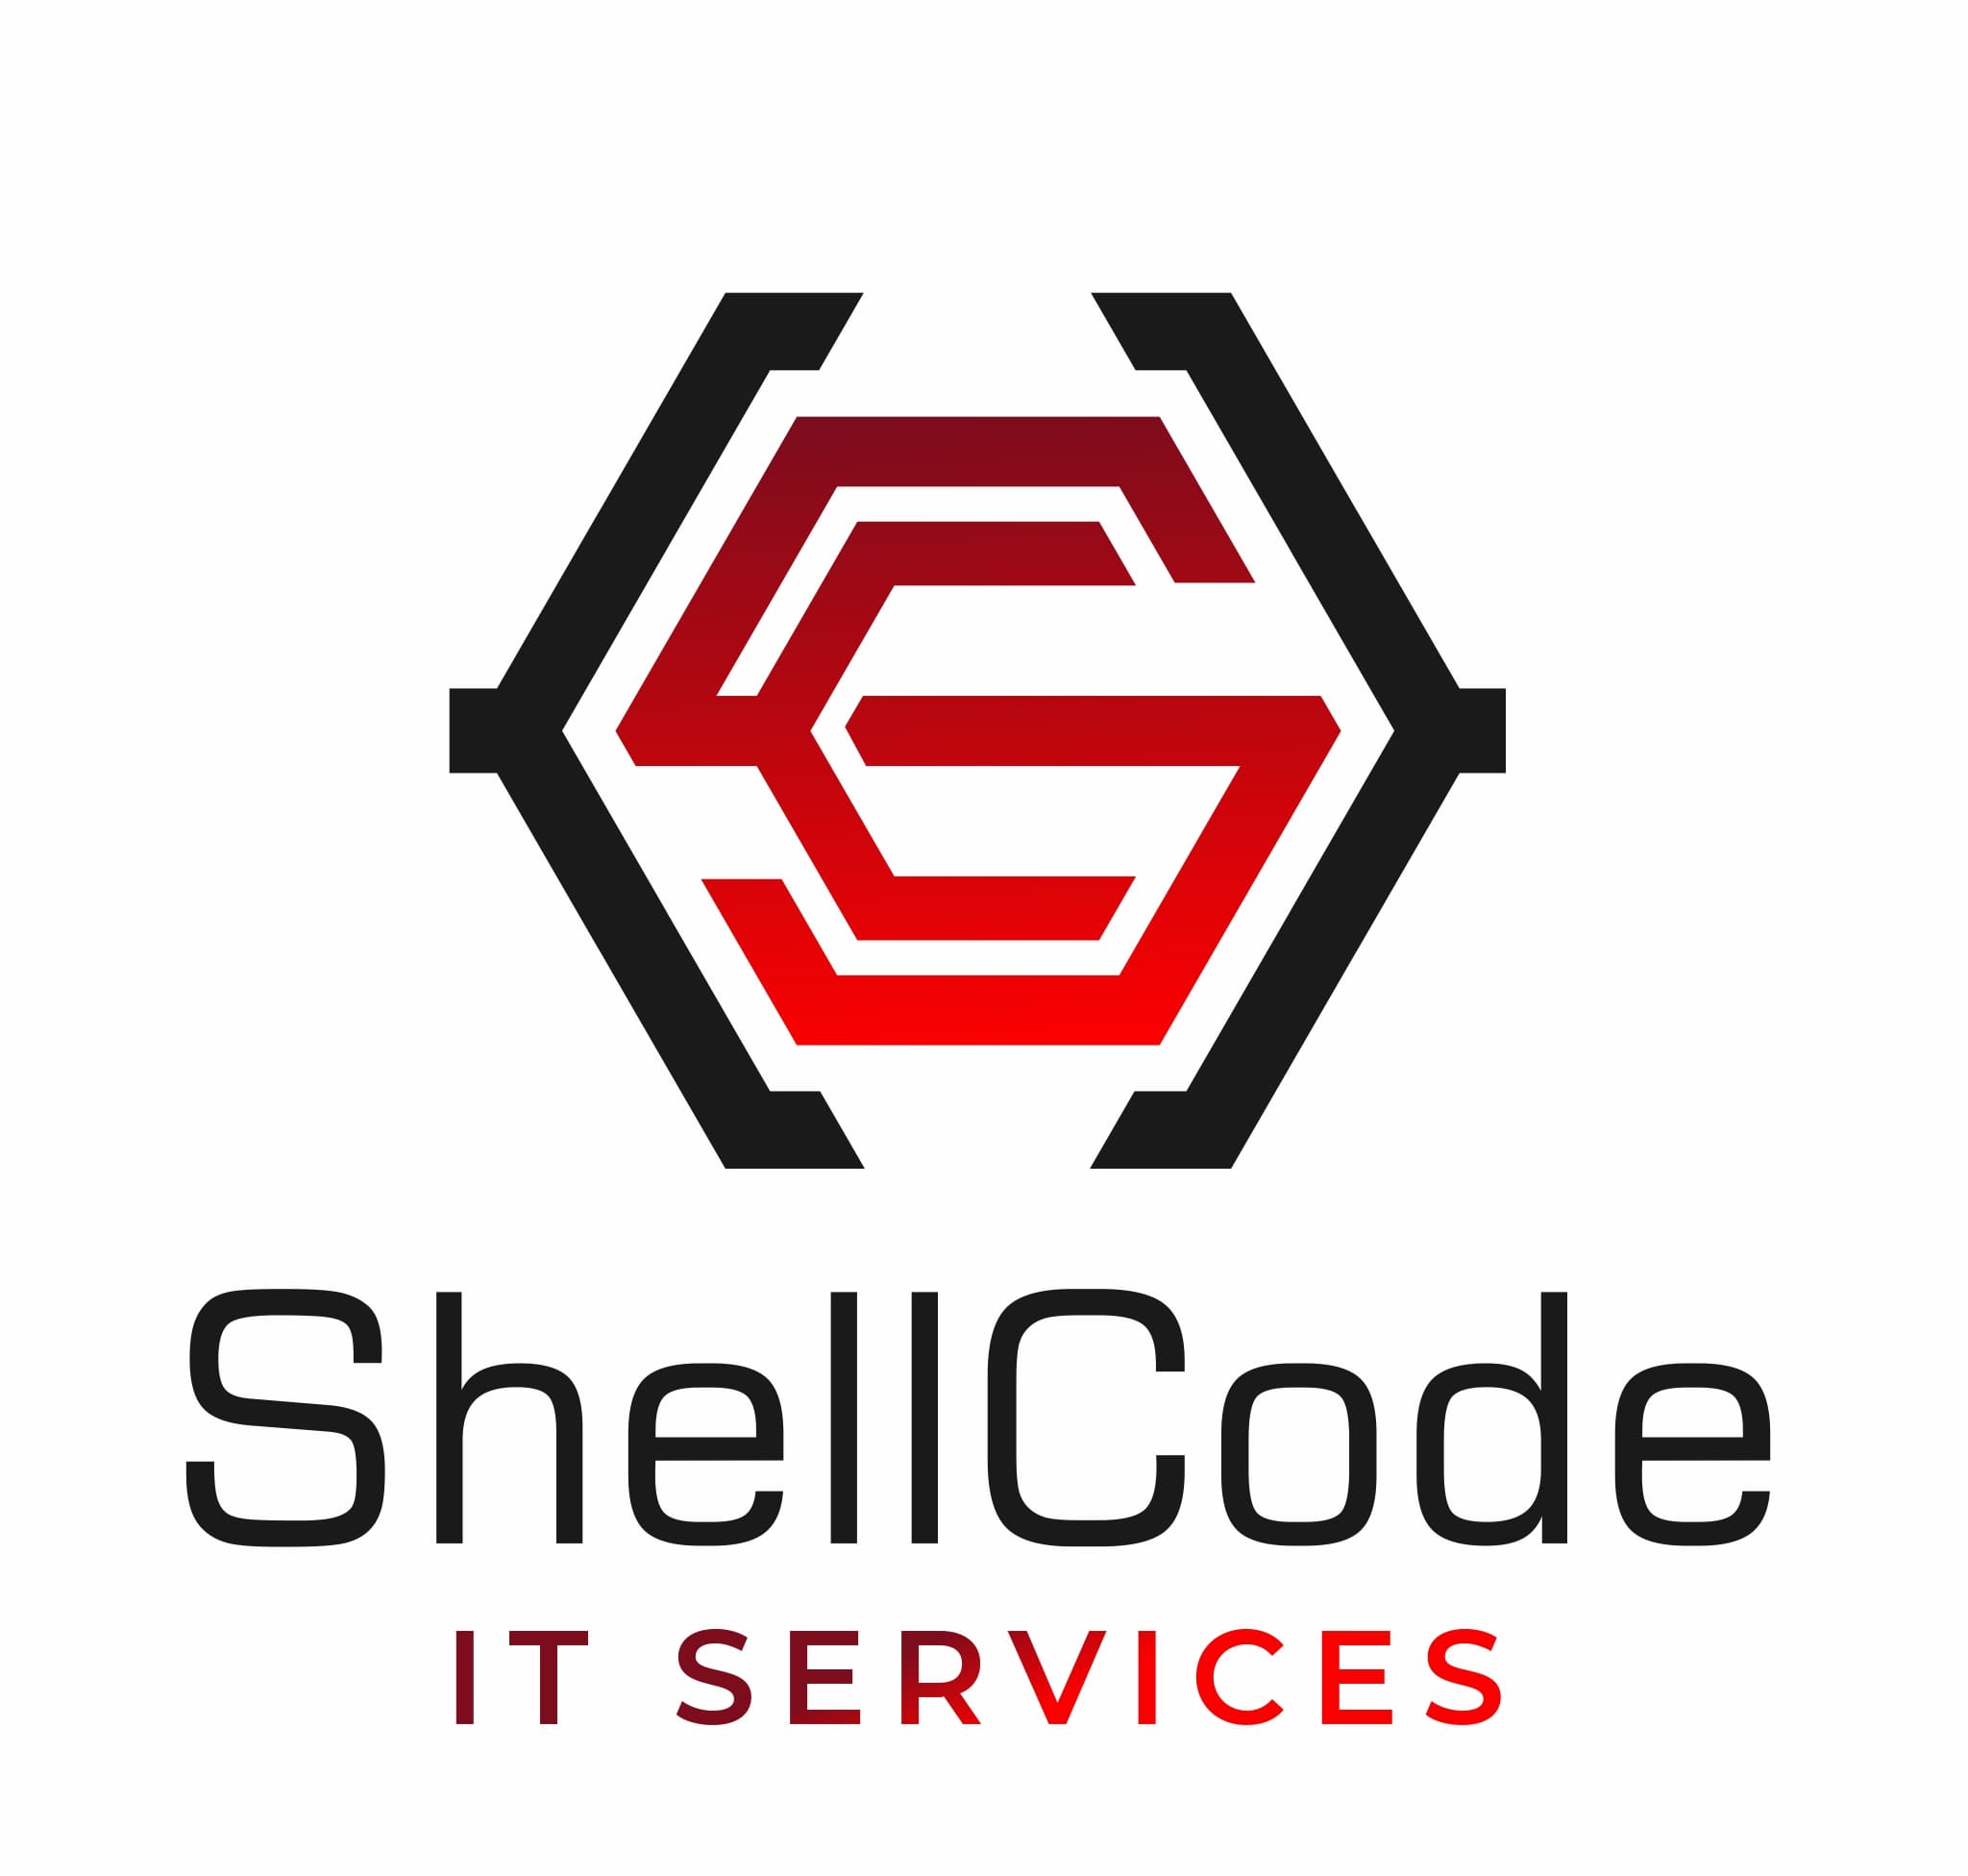 Shellcode IT services